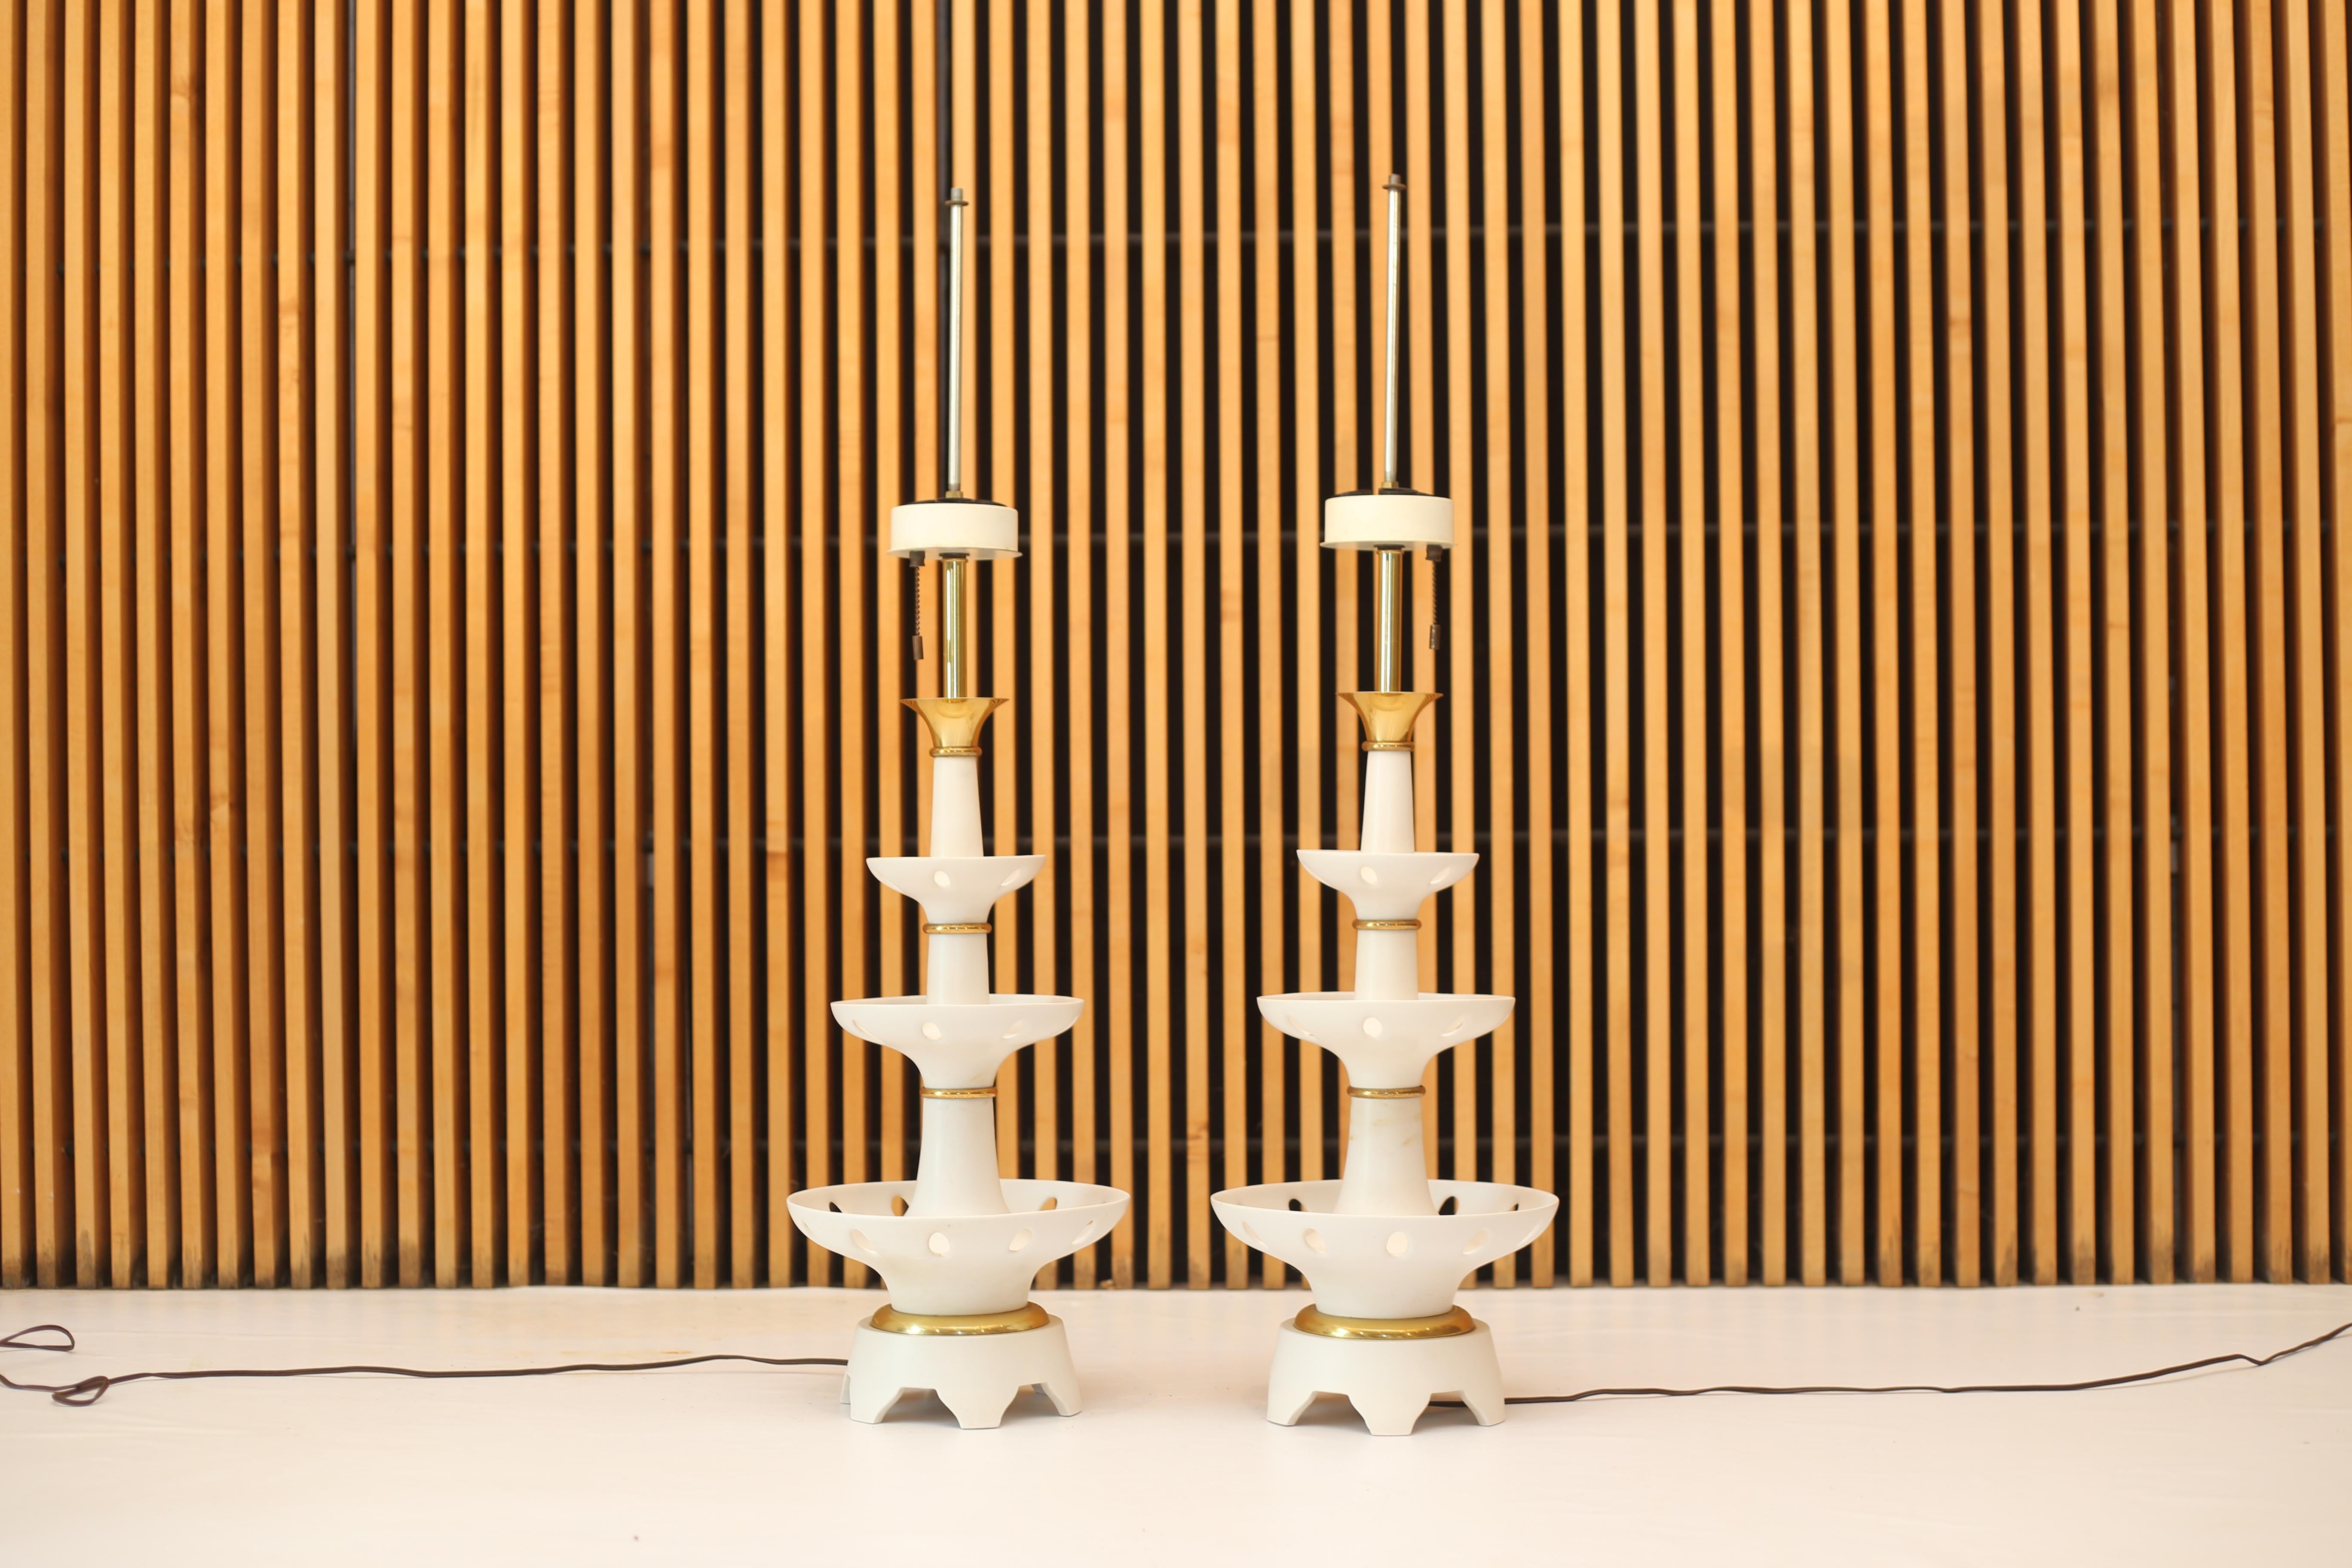 A pair of lamps designed by Gerald Thurston for Lightolier. 

Lamps have original wiring in working order. 
Overall in excellent condition. Sold without lamp shades or finials. 

Dimensions:
39.5